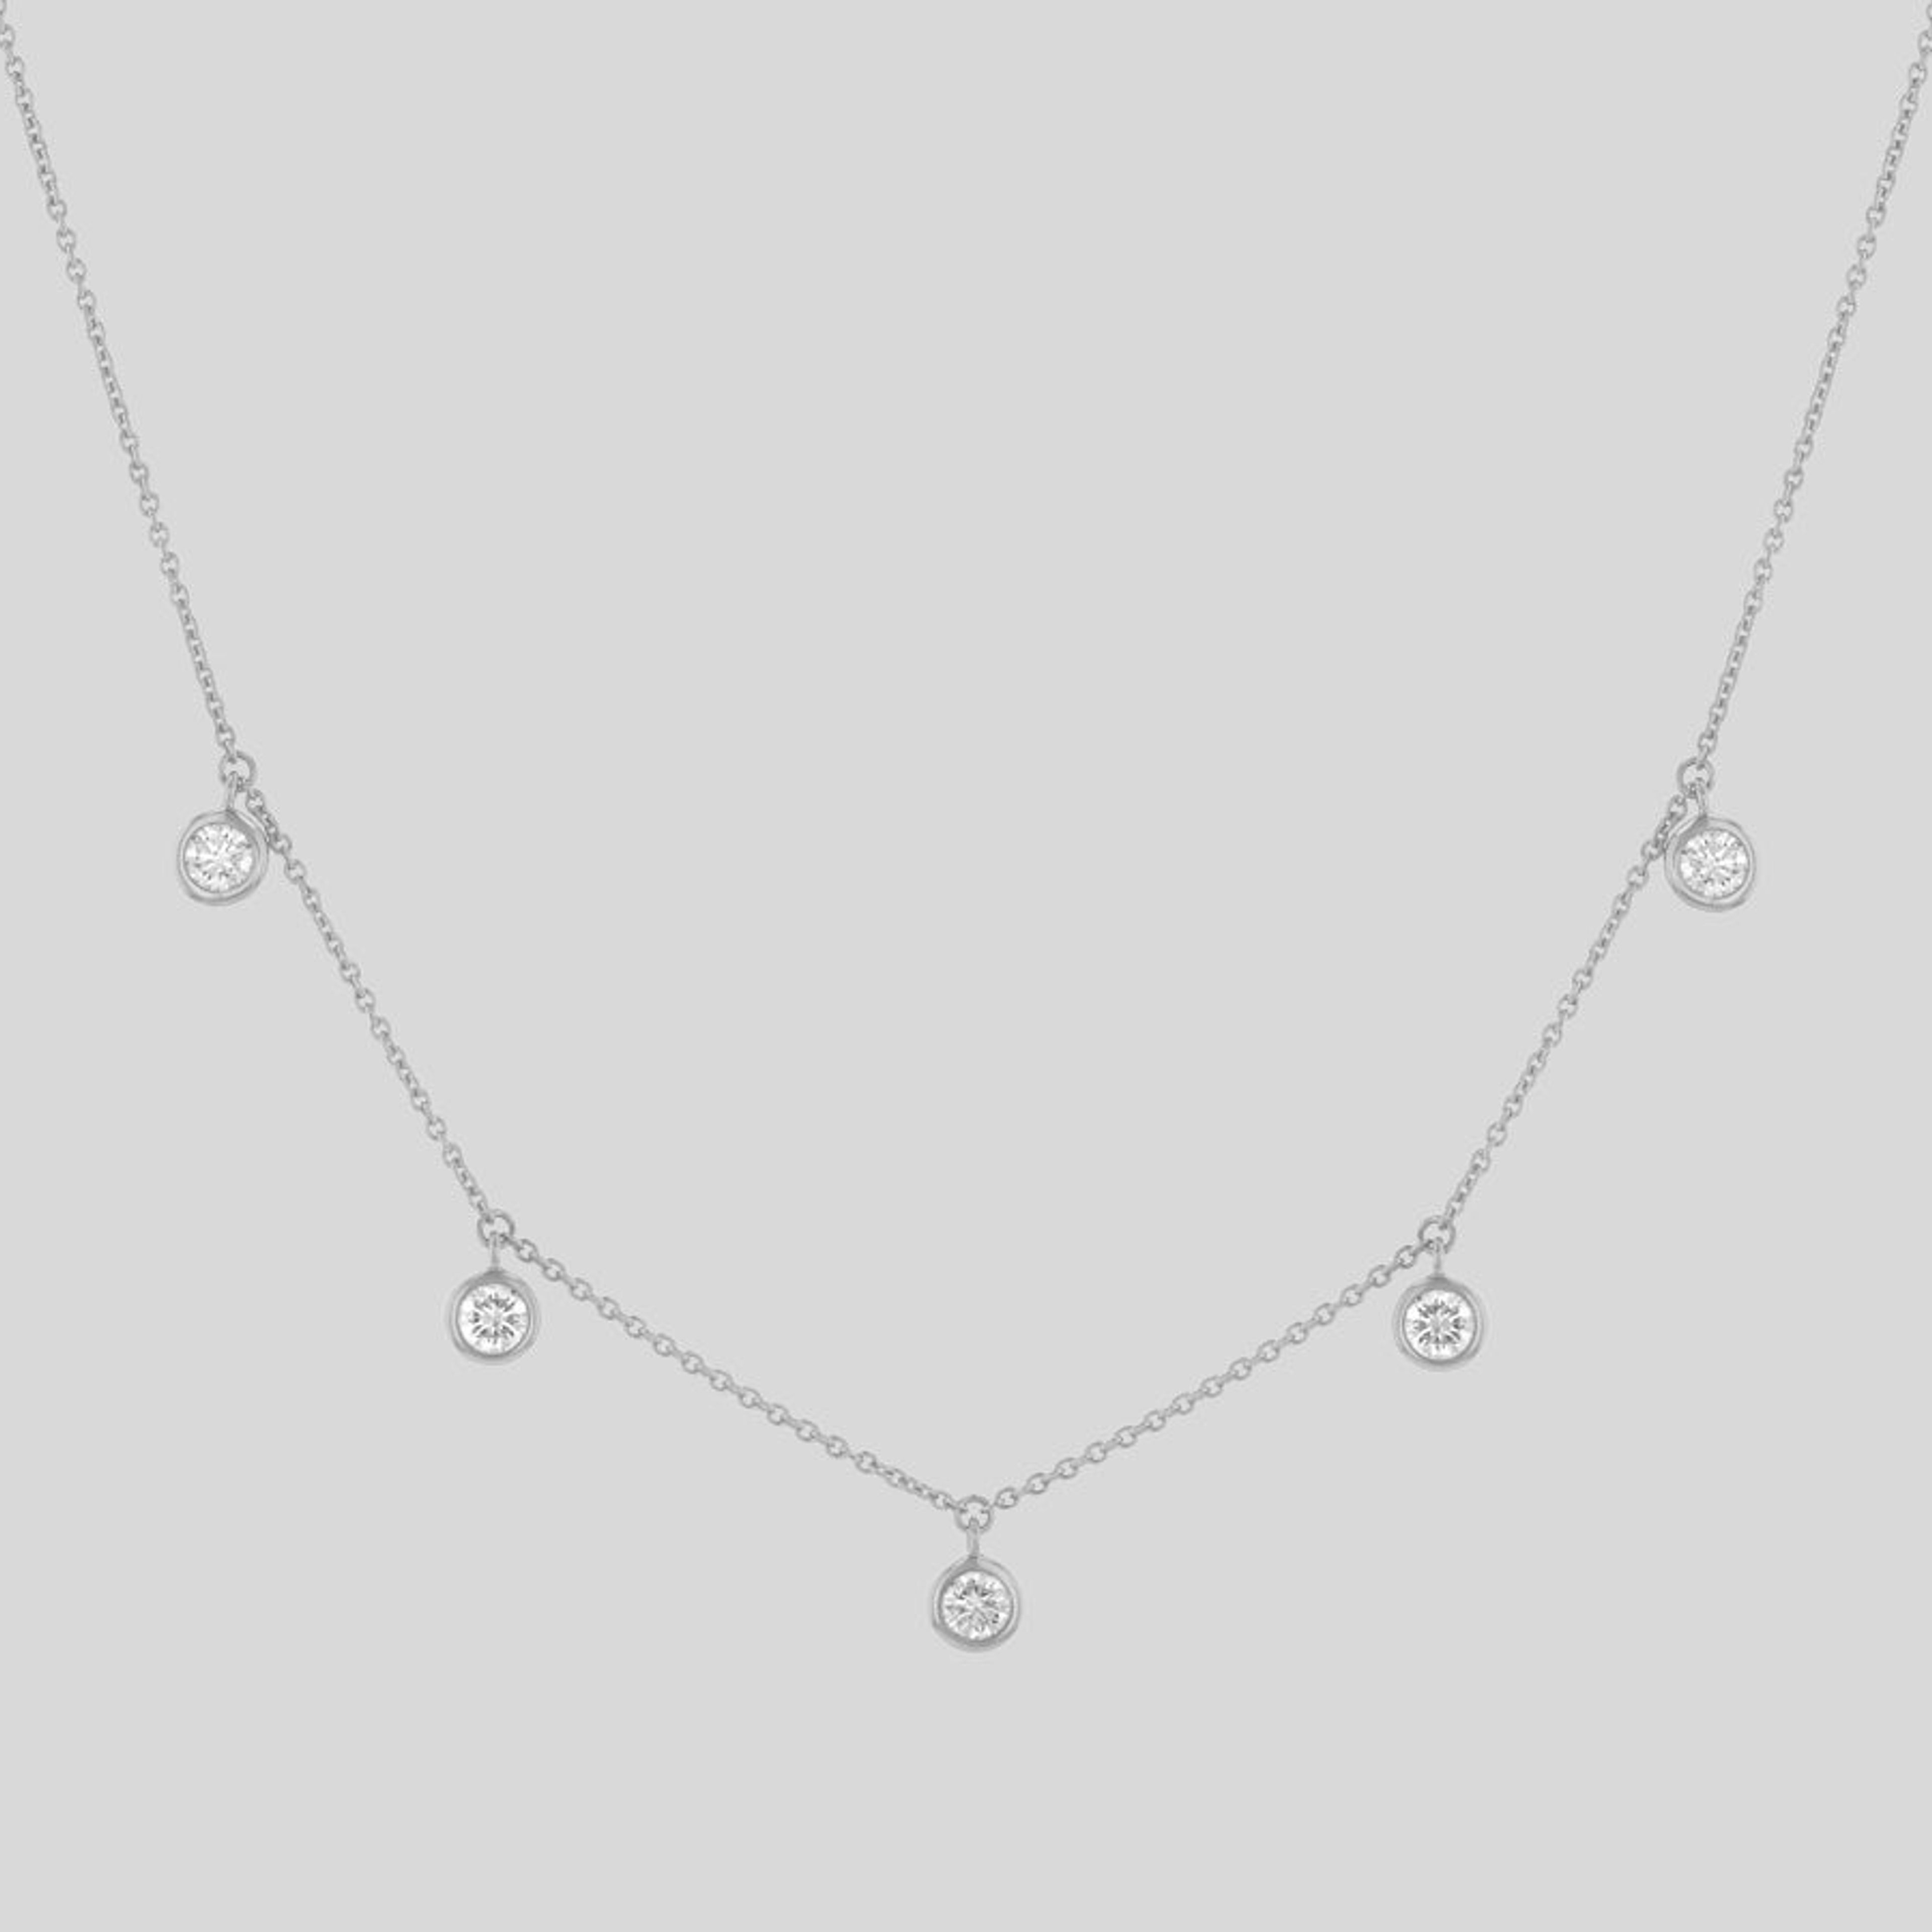 The 5 Diamond Necklace with 0.75 Carats